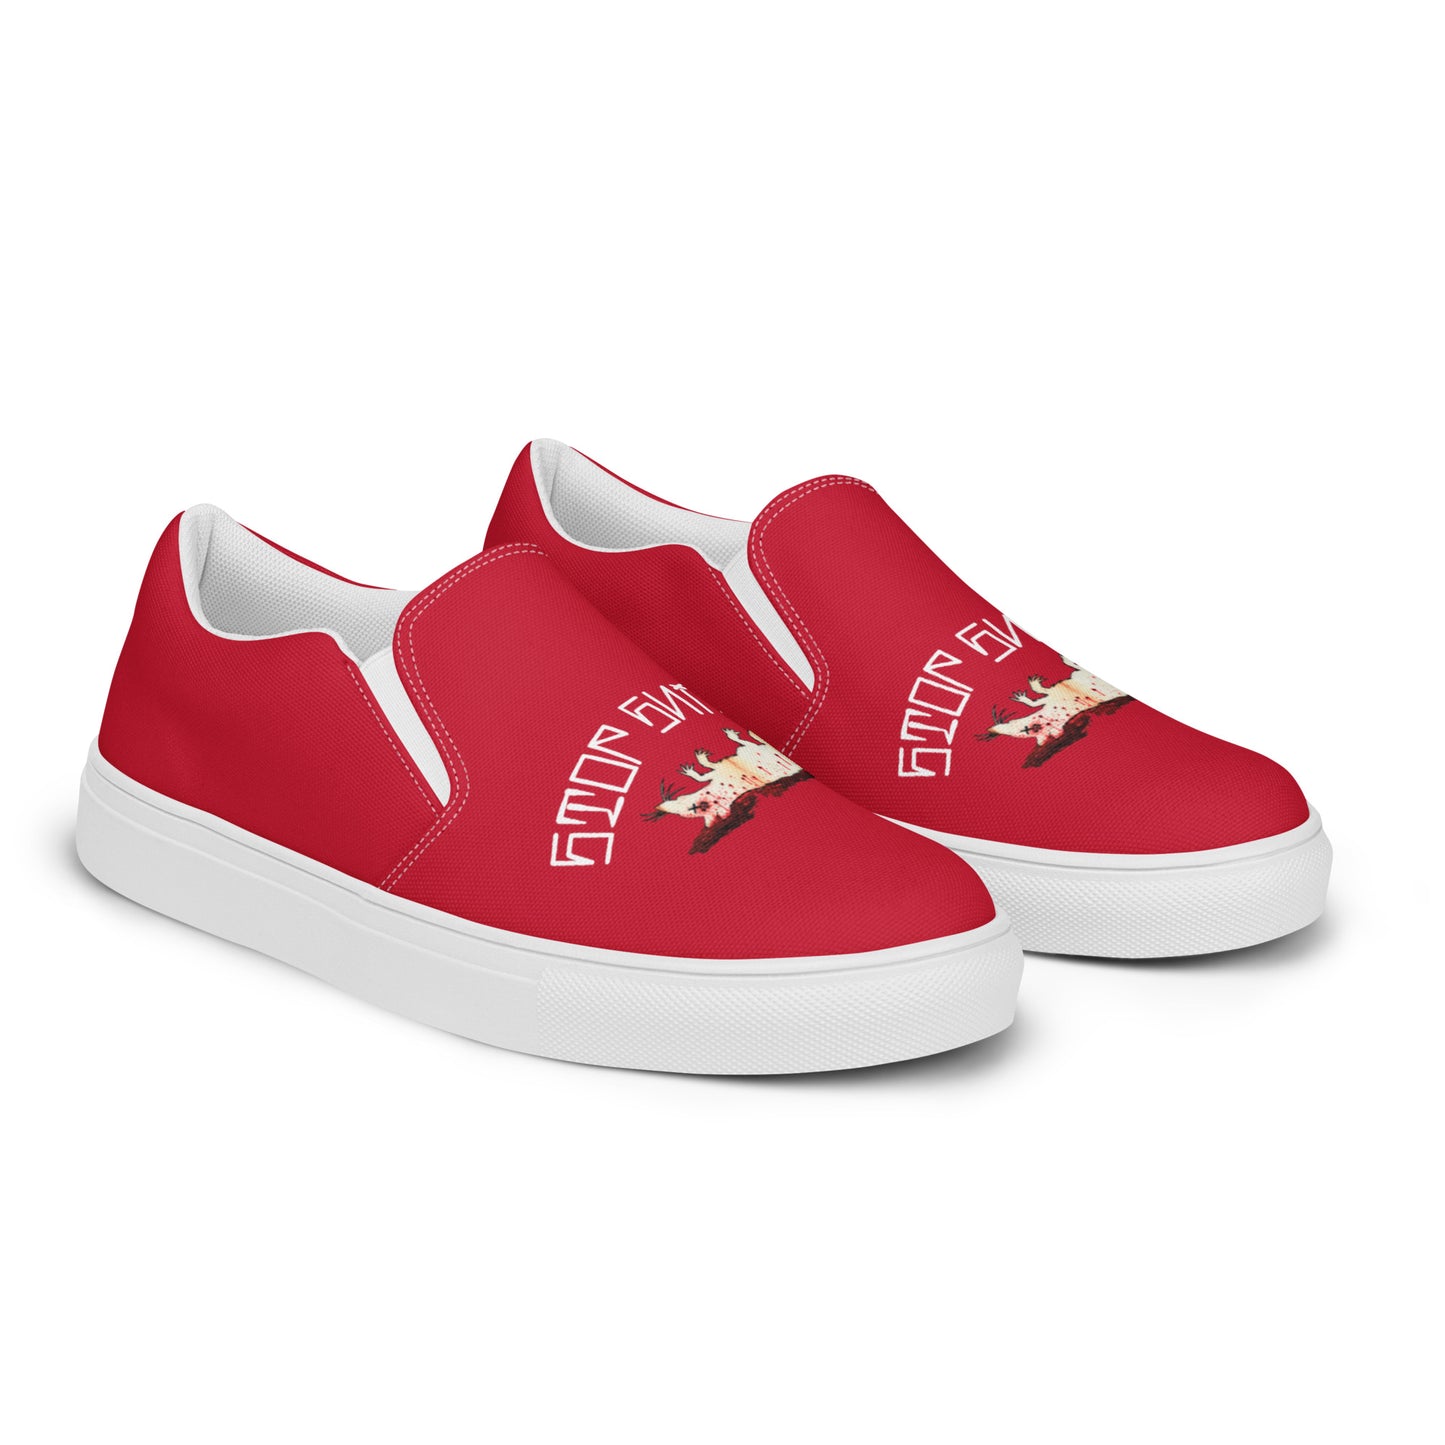 Women’s Fink Red slip-on canvas shoes